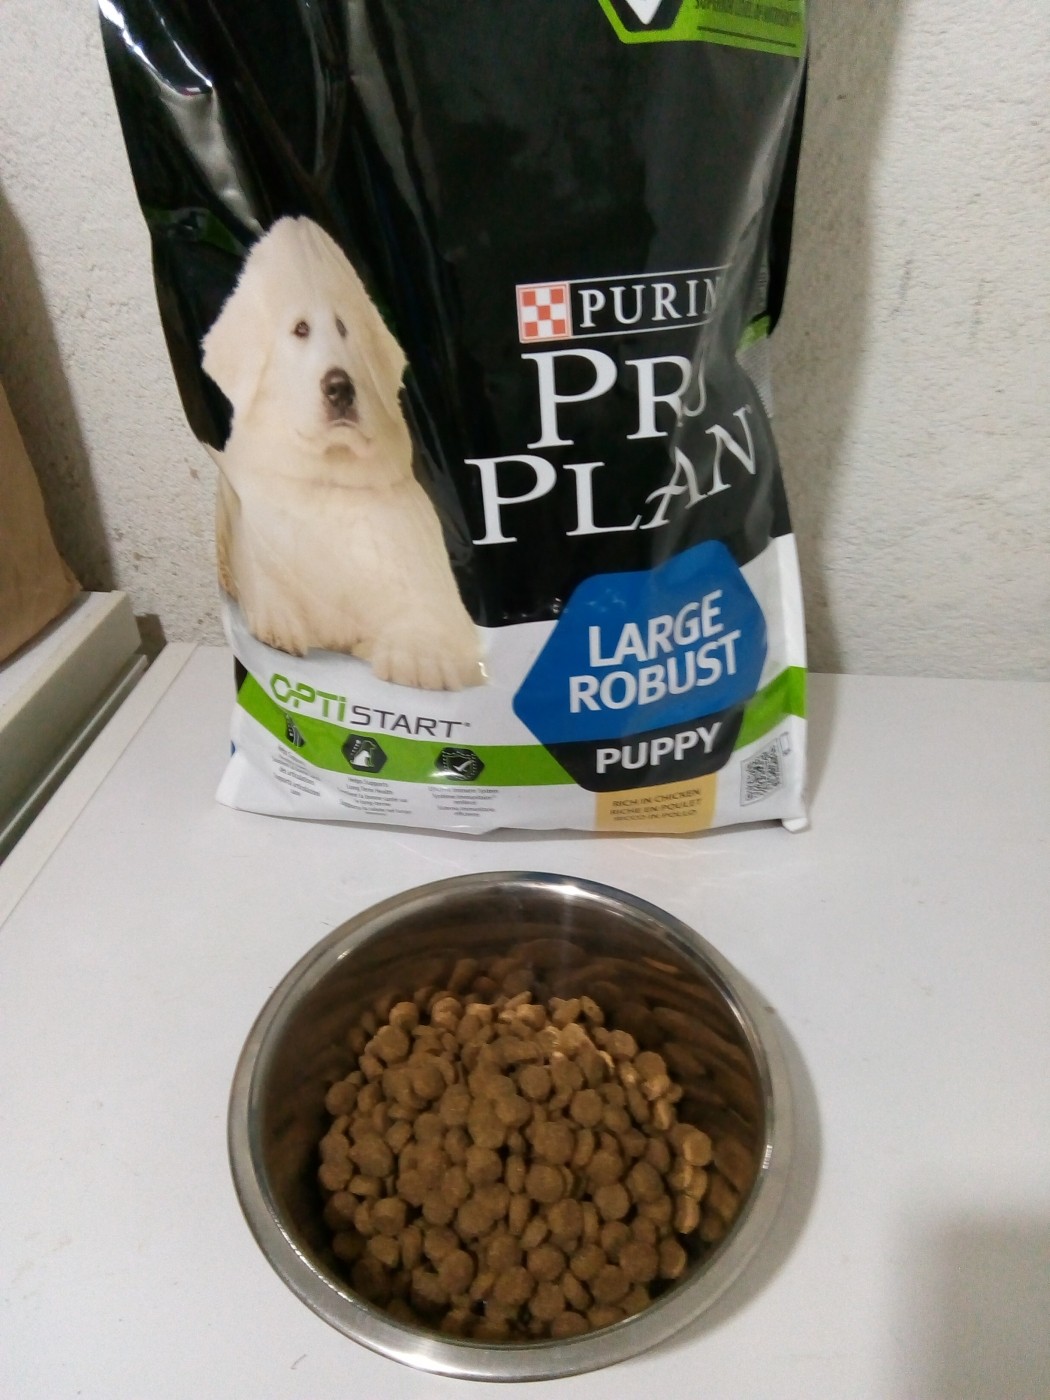 Purina Pro Plan Robust Puppy Reviews